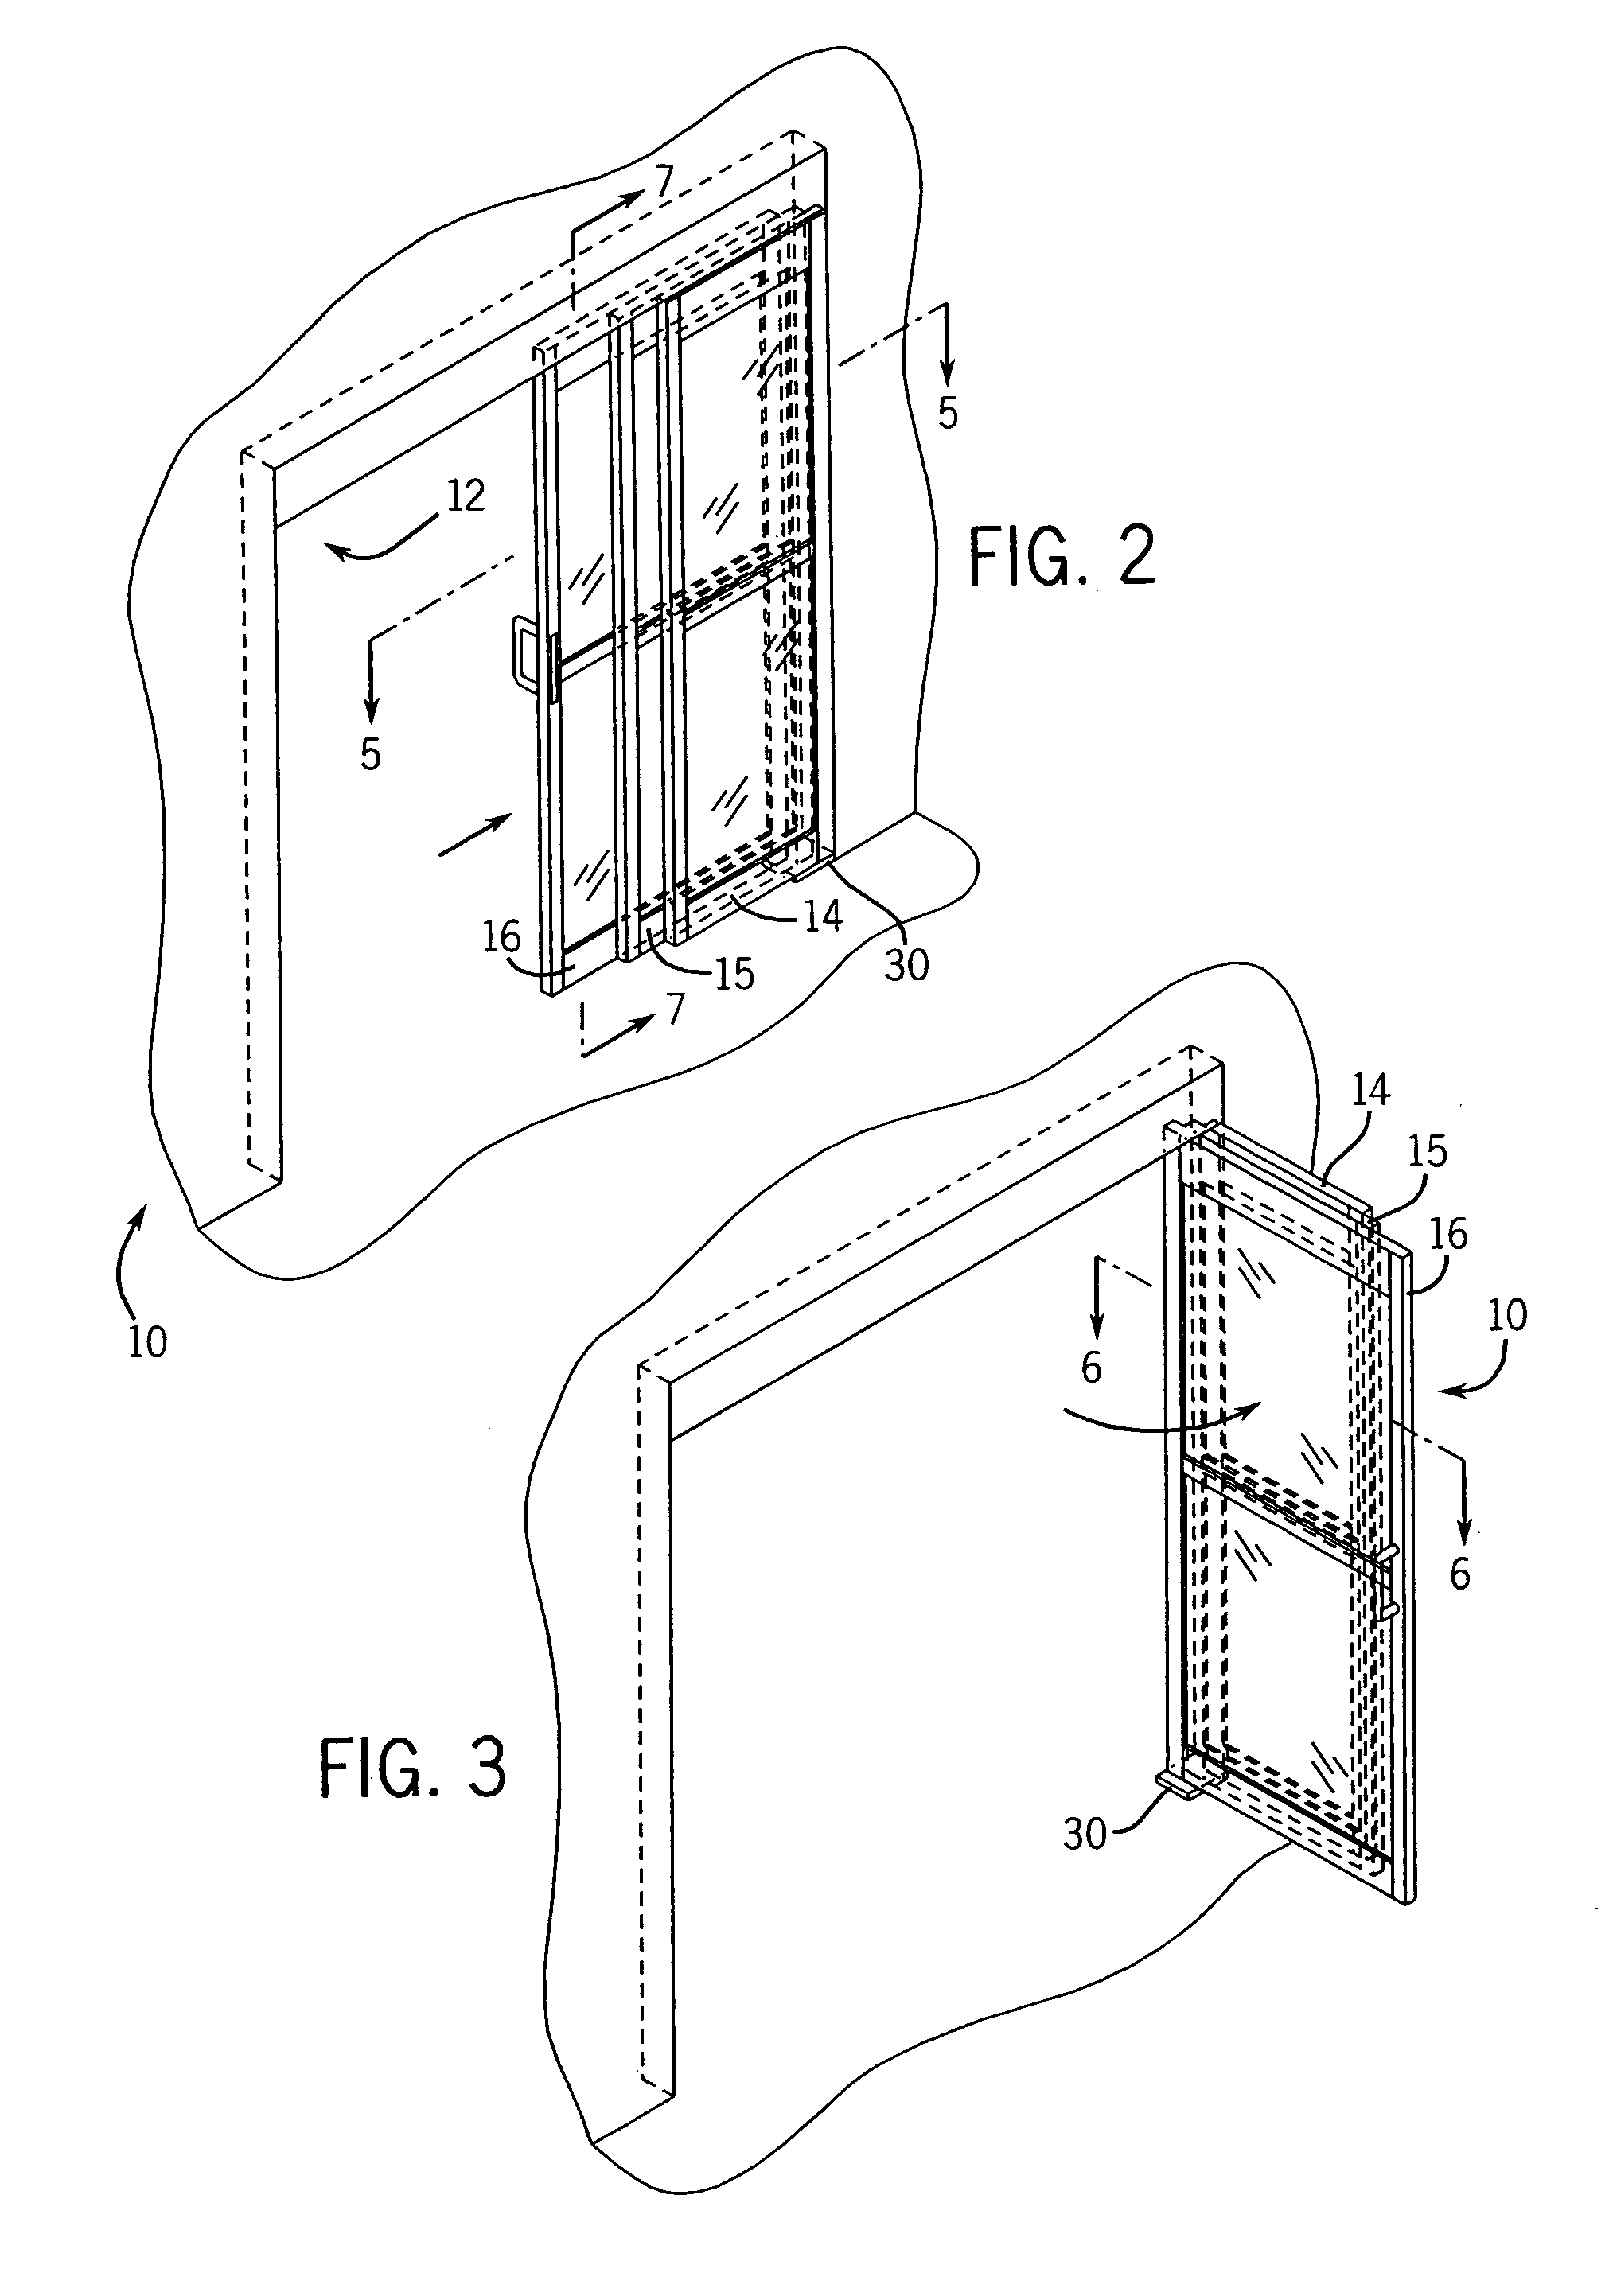 Slidable door assemblies with automatic pivot latching